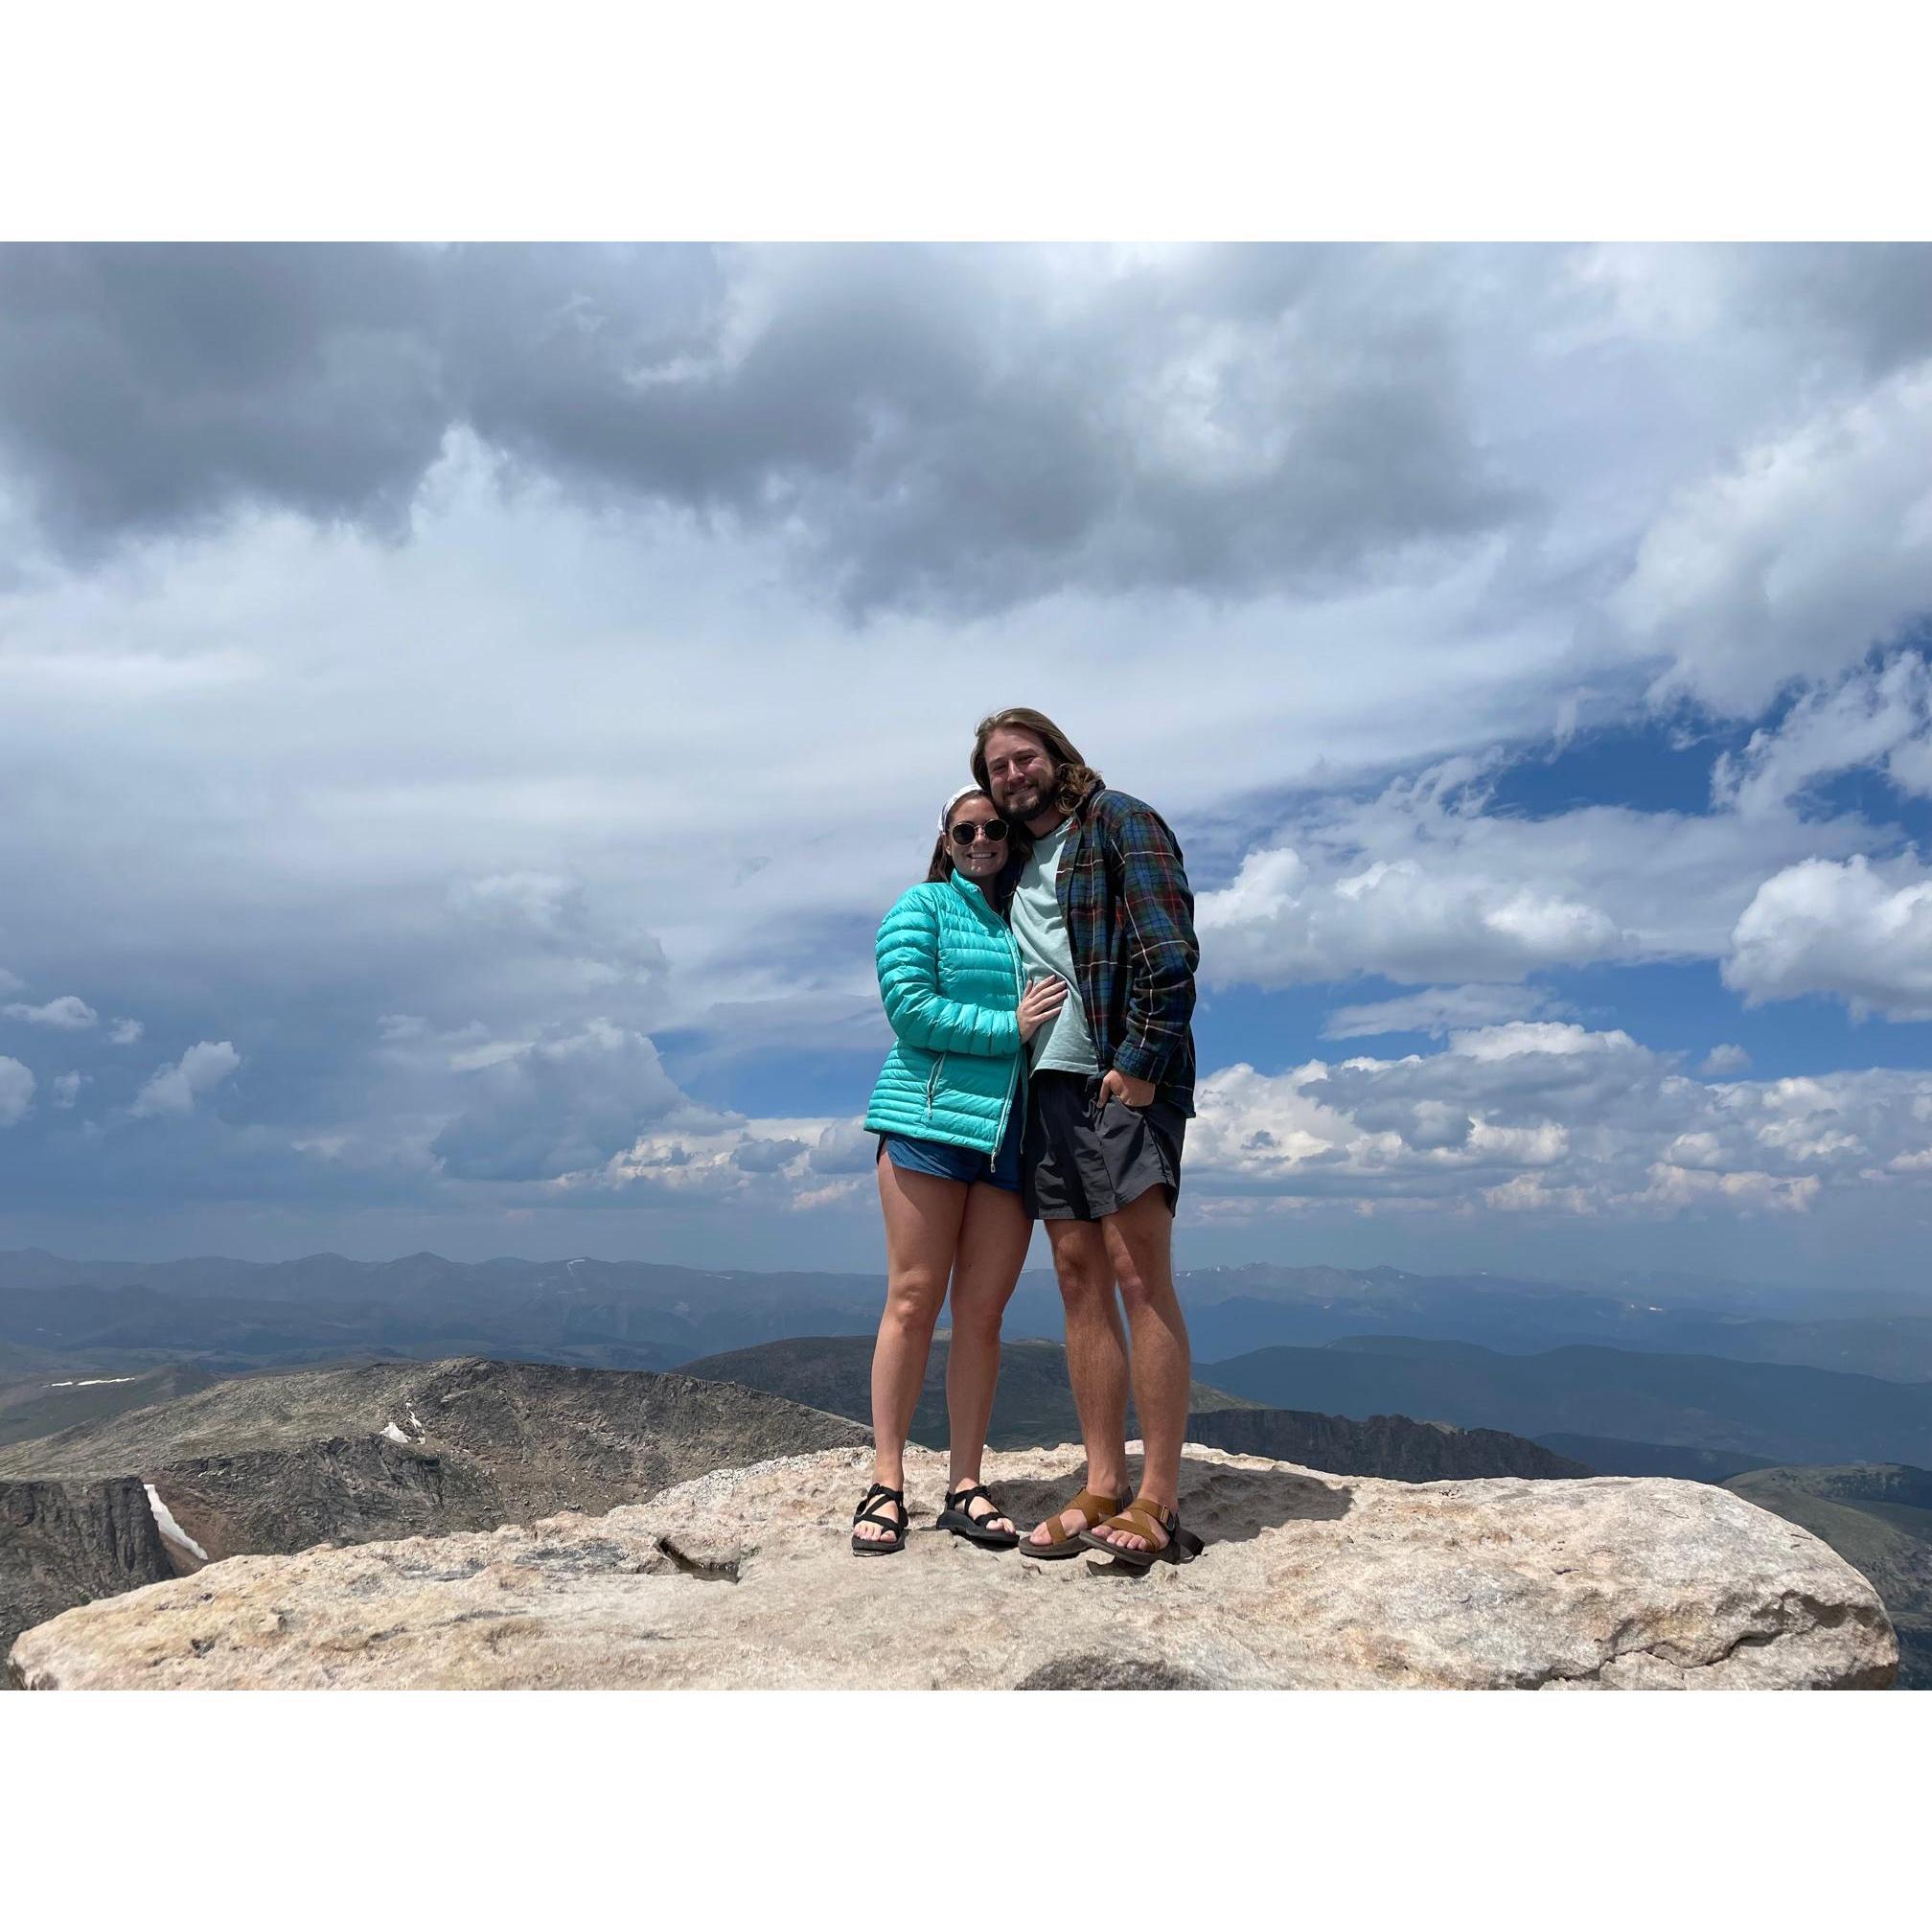 Taken at the top of MT. Evans!